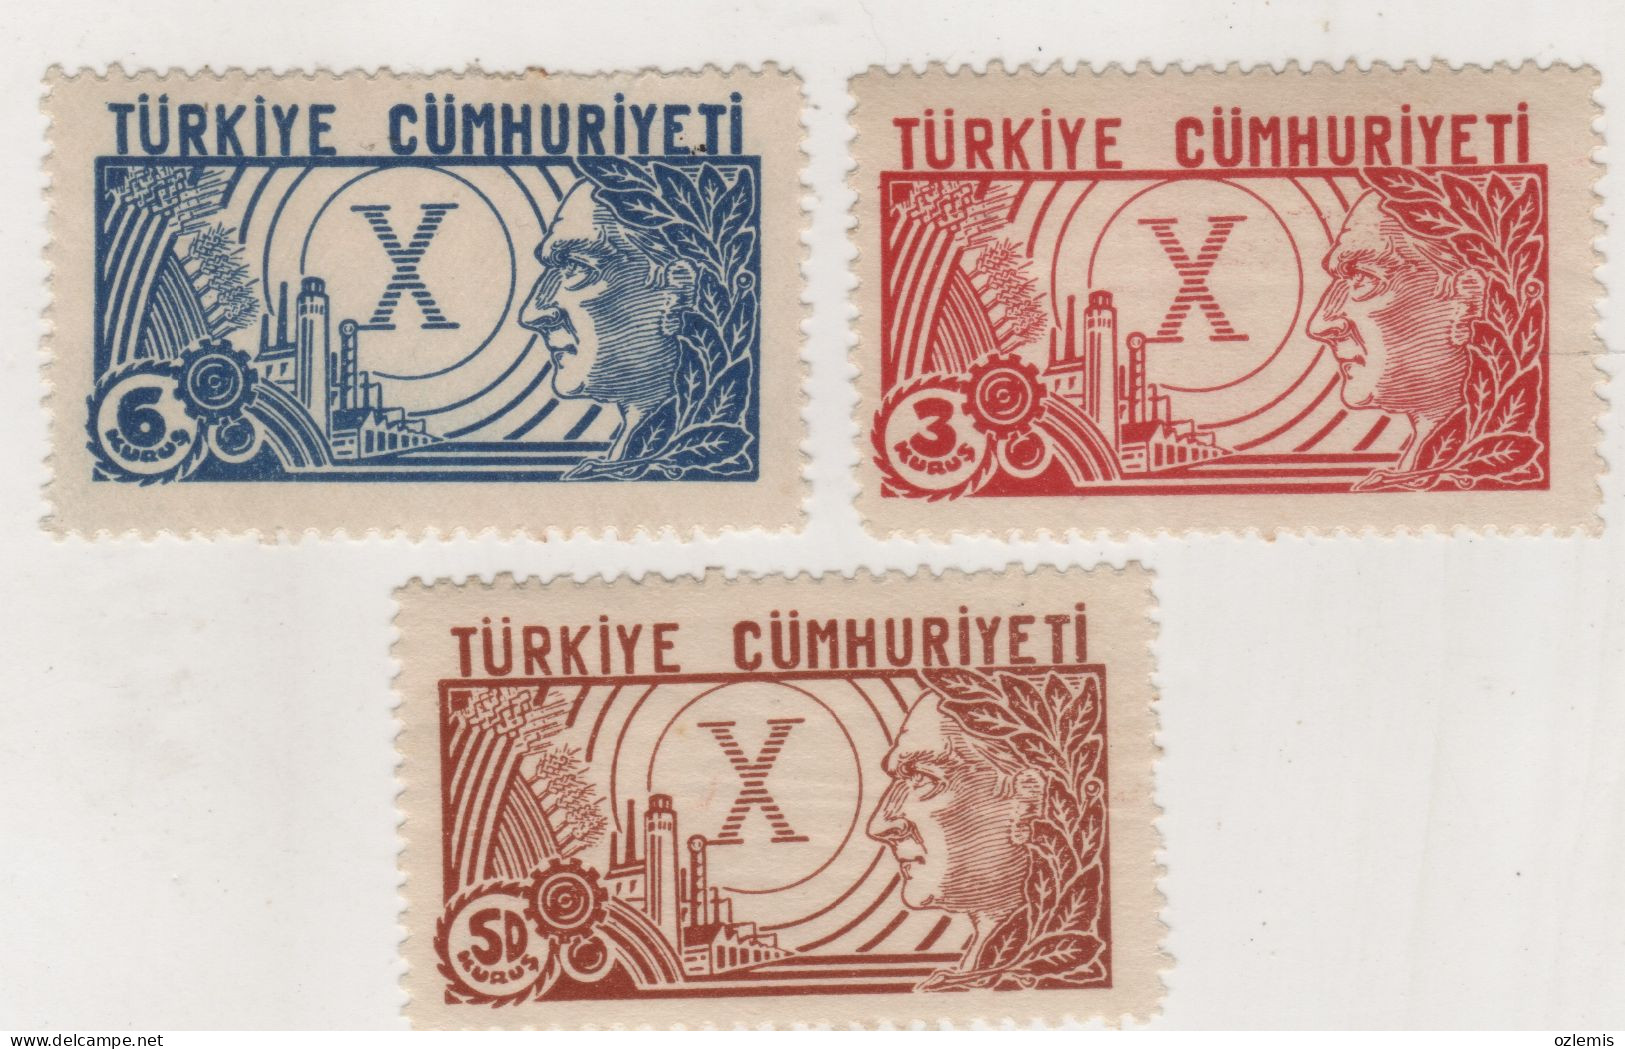 TURKEY,TURKEI,TURQUIE ,1933 ,COMMEMORATIVE STAMPS FOR THE 100TH ANIVERSARY OF THE REPUBLIC,,,STAMP,MNH - Unused Stamps